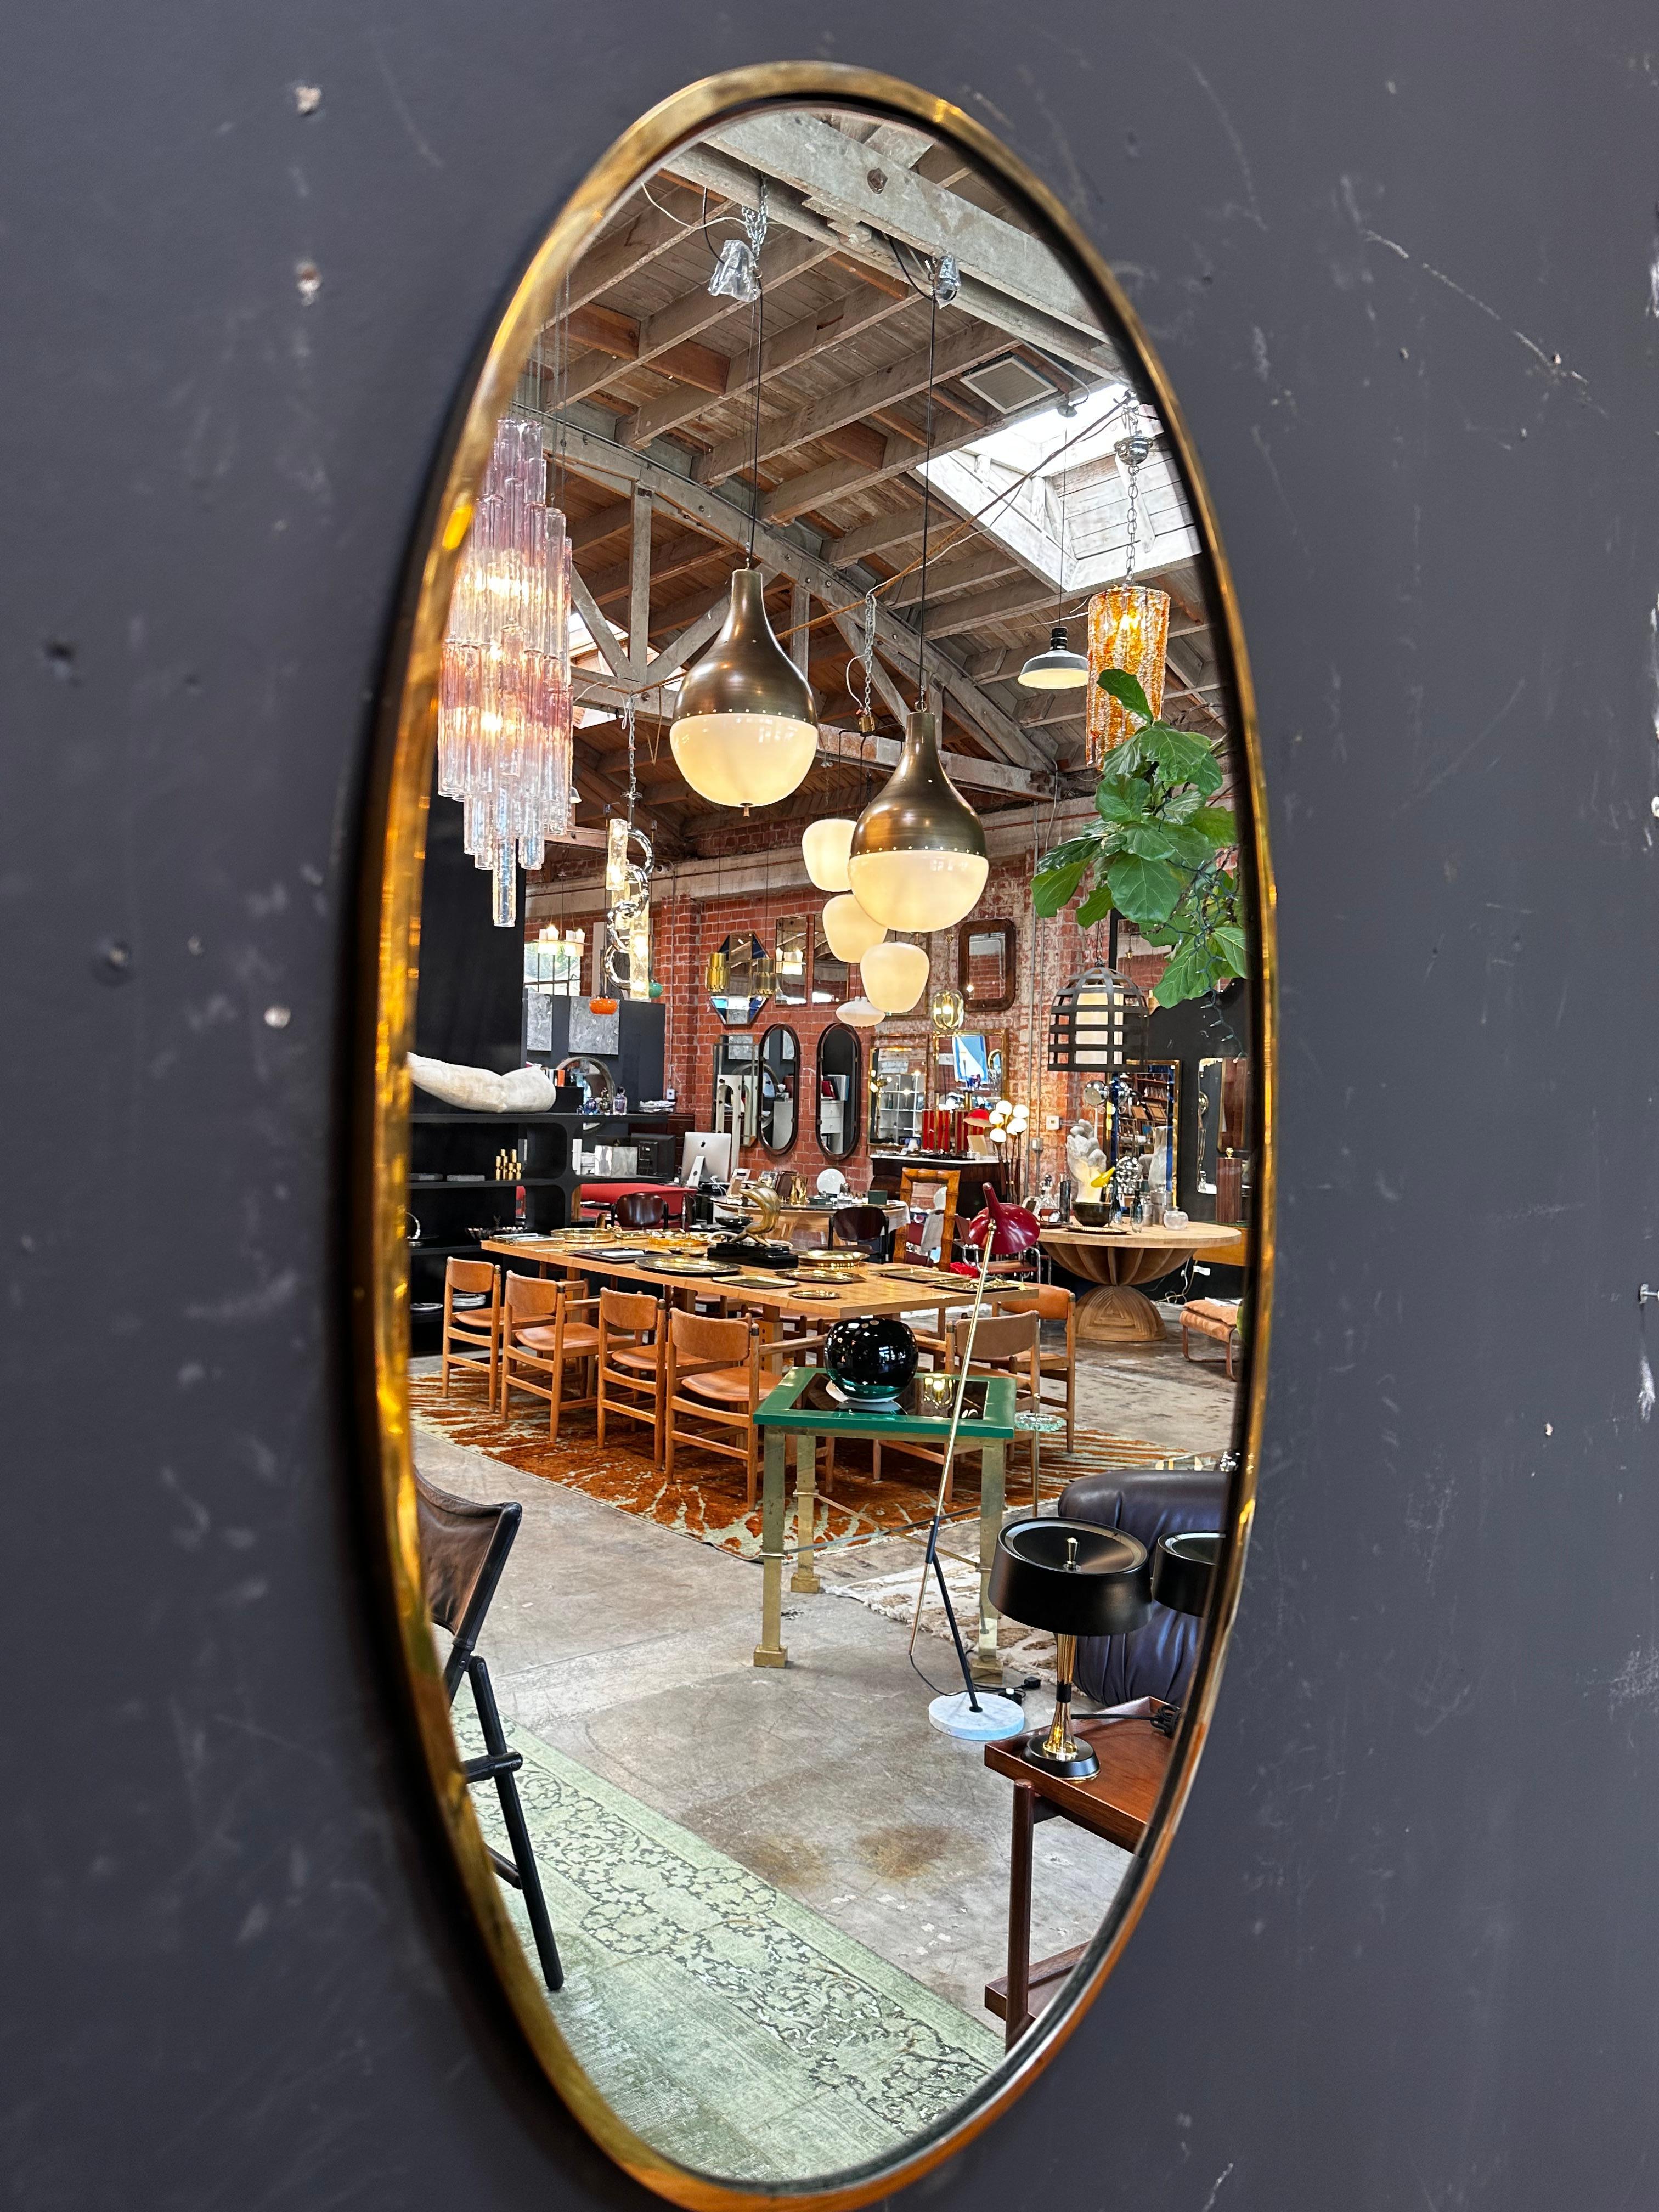 The Mid Century Italian Oval Brass Mirror from the 1980s features a chic oval shape and a timeless brass finish, embodying the style of the era.

